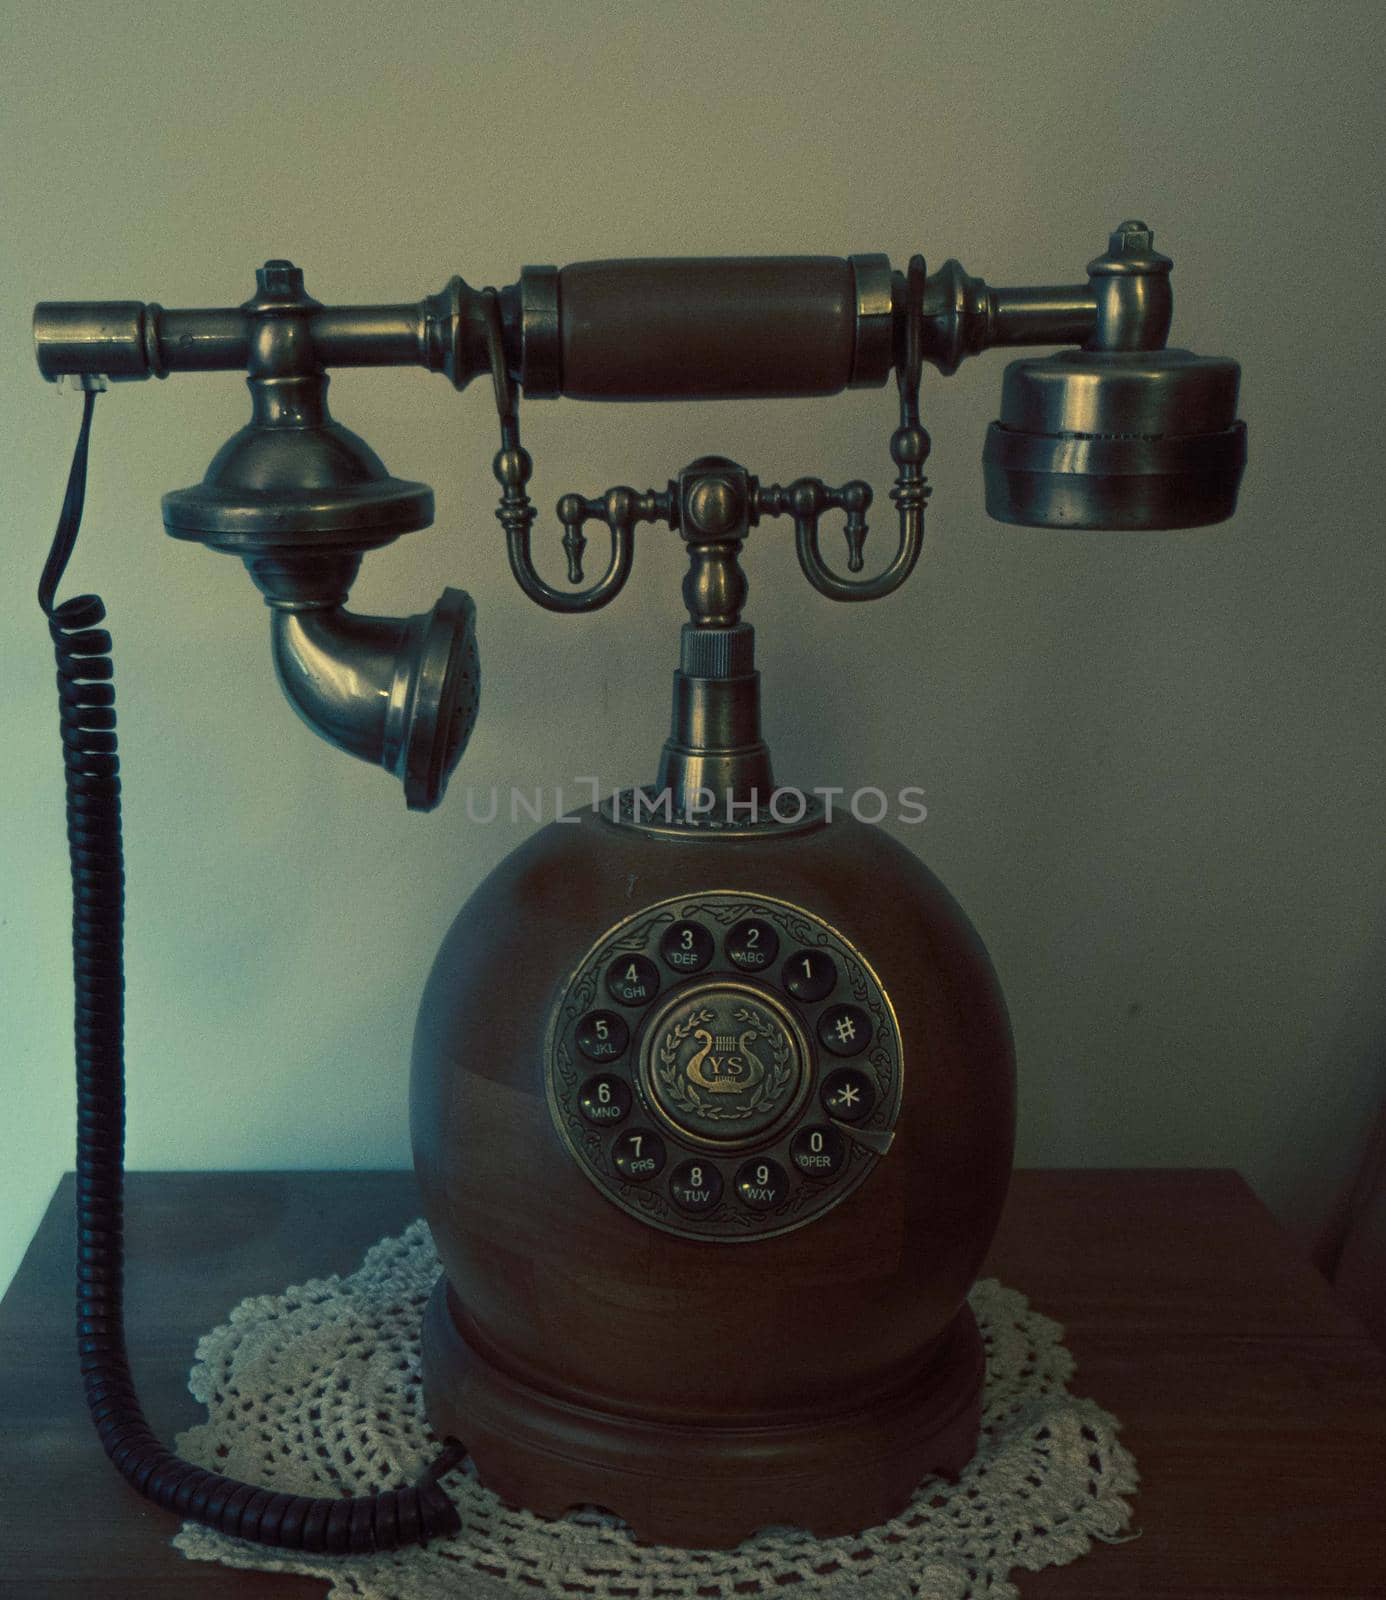 Antique fixed telephone with earphone and made of wood by xavier_photo